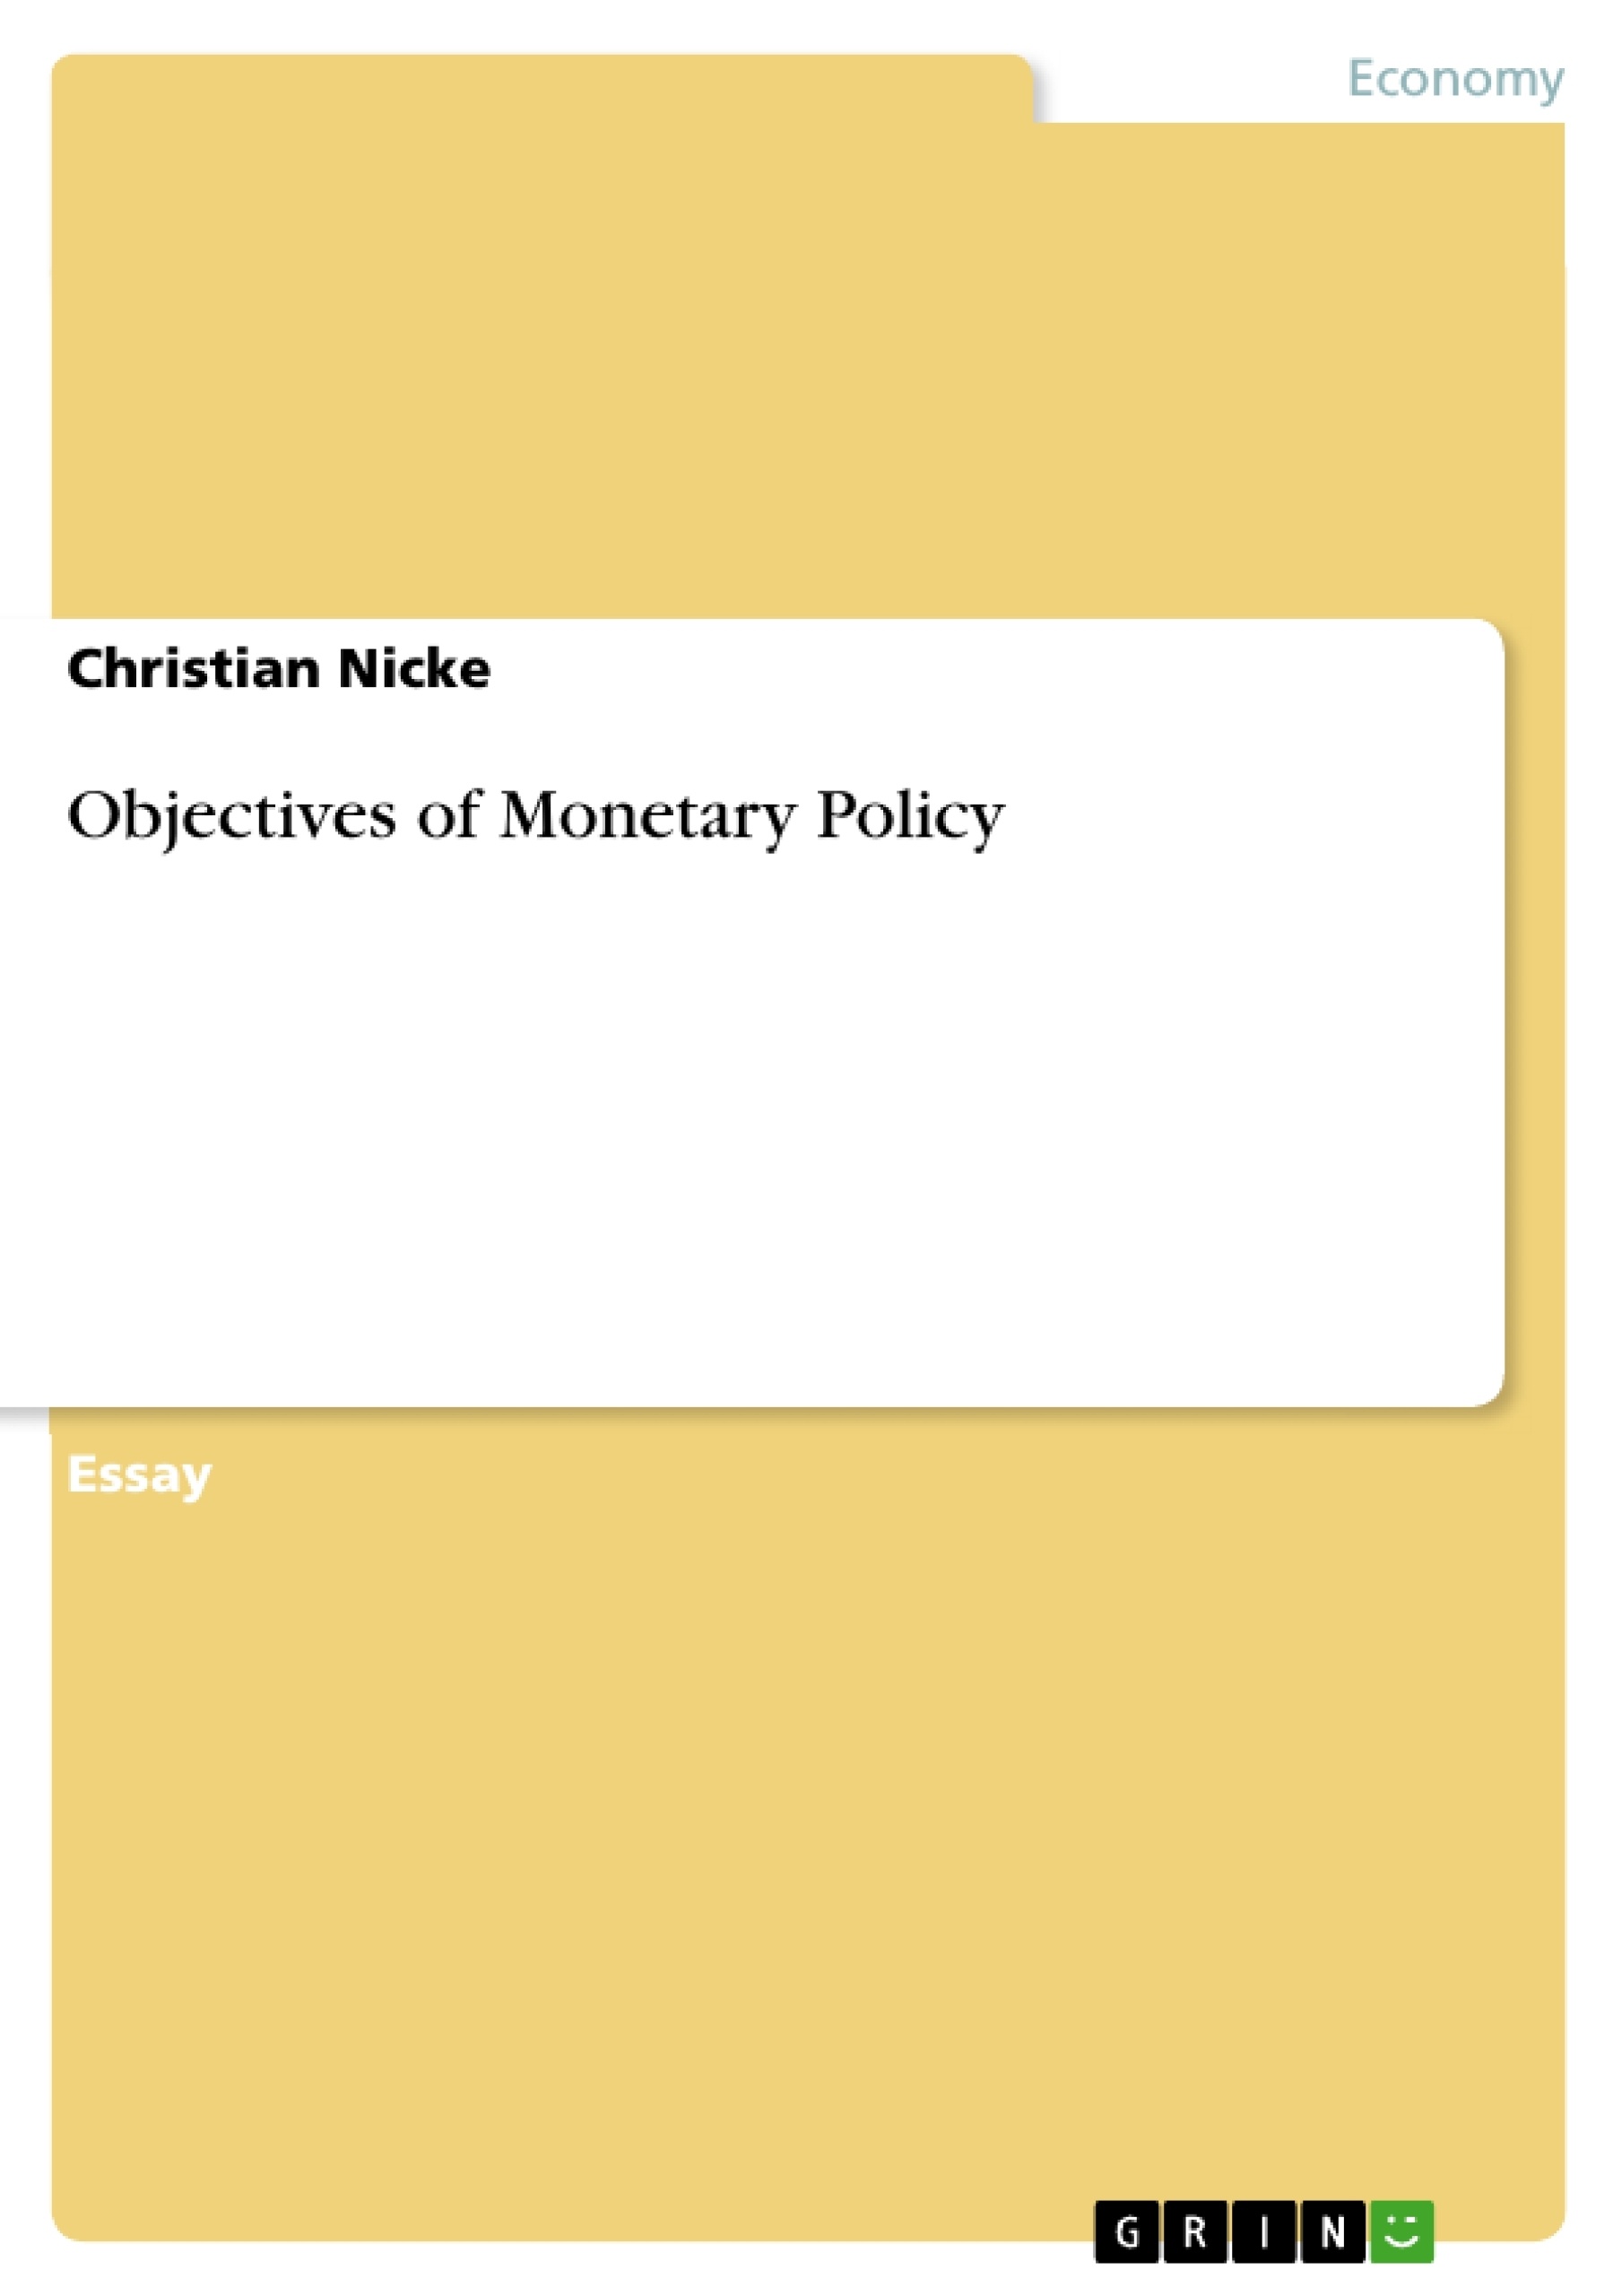 Title: Objectives of Monetary Policy